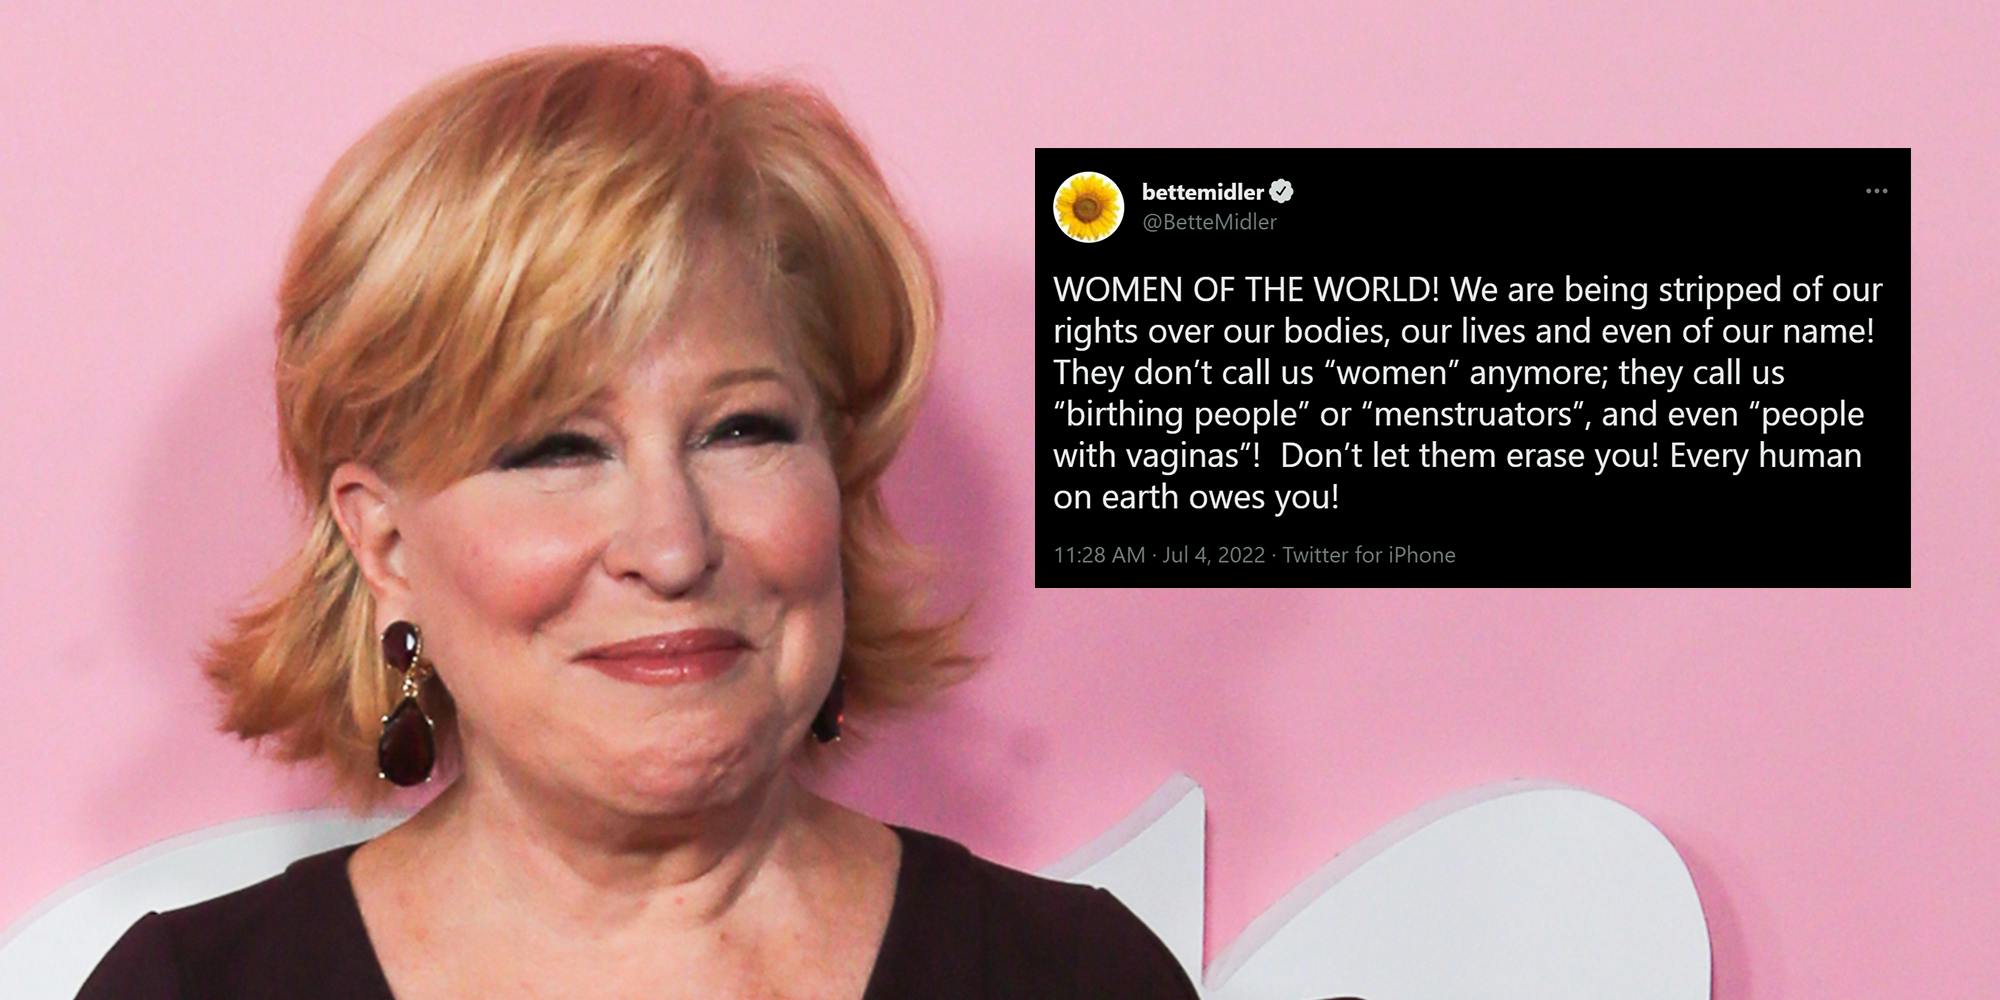 bette midler with tweet that reads "women of the world! we are being stripped of our rights over our bodies, our lives and even of our name! They don't call us 'women' anymore; they call us 'birthing people' or 'menstruators', and even 'people with vaginas'! Don't let them erase you! Every human on earth owes you!"